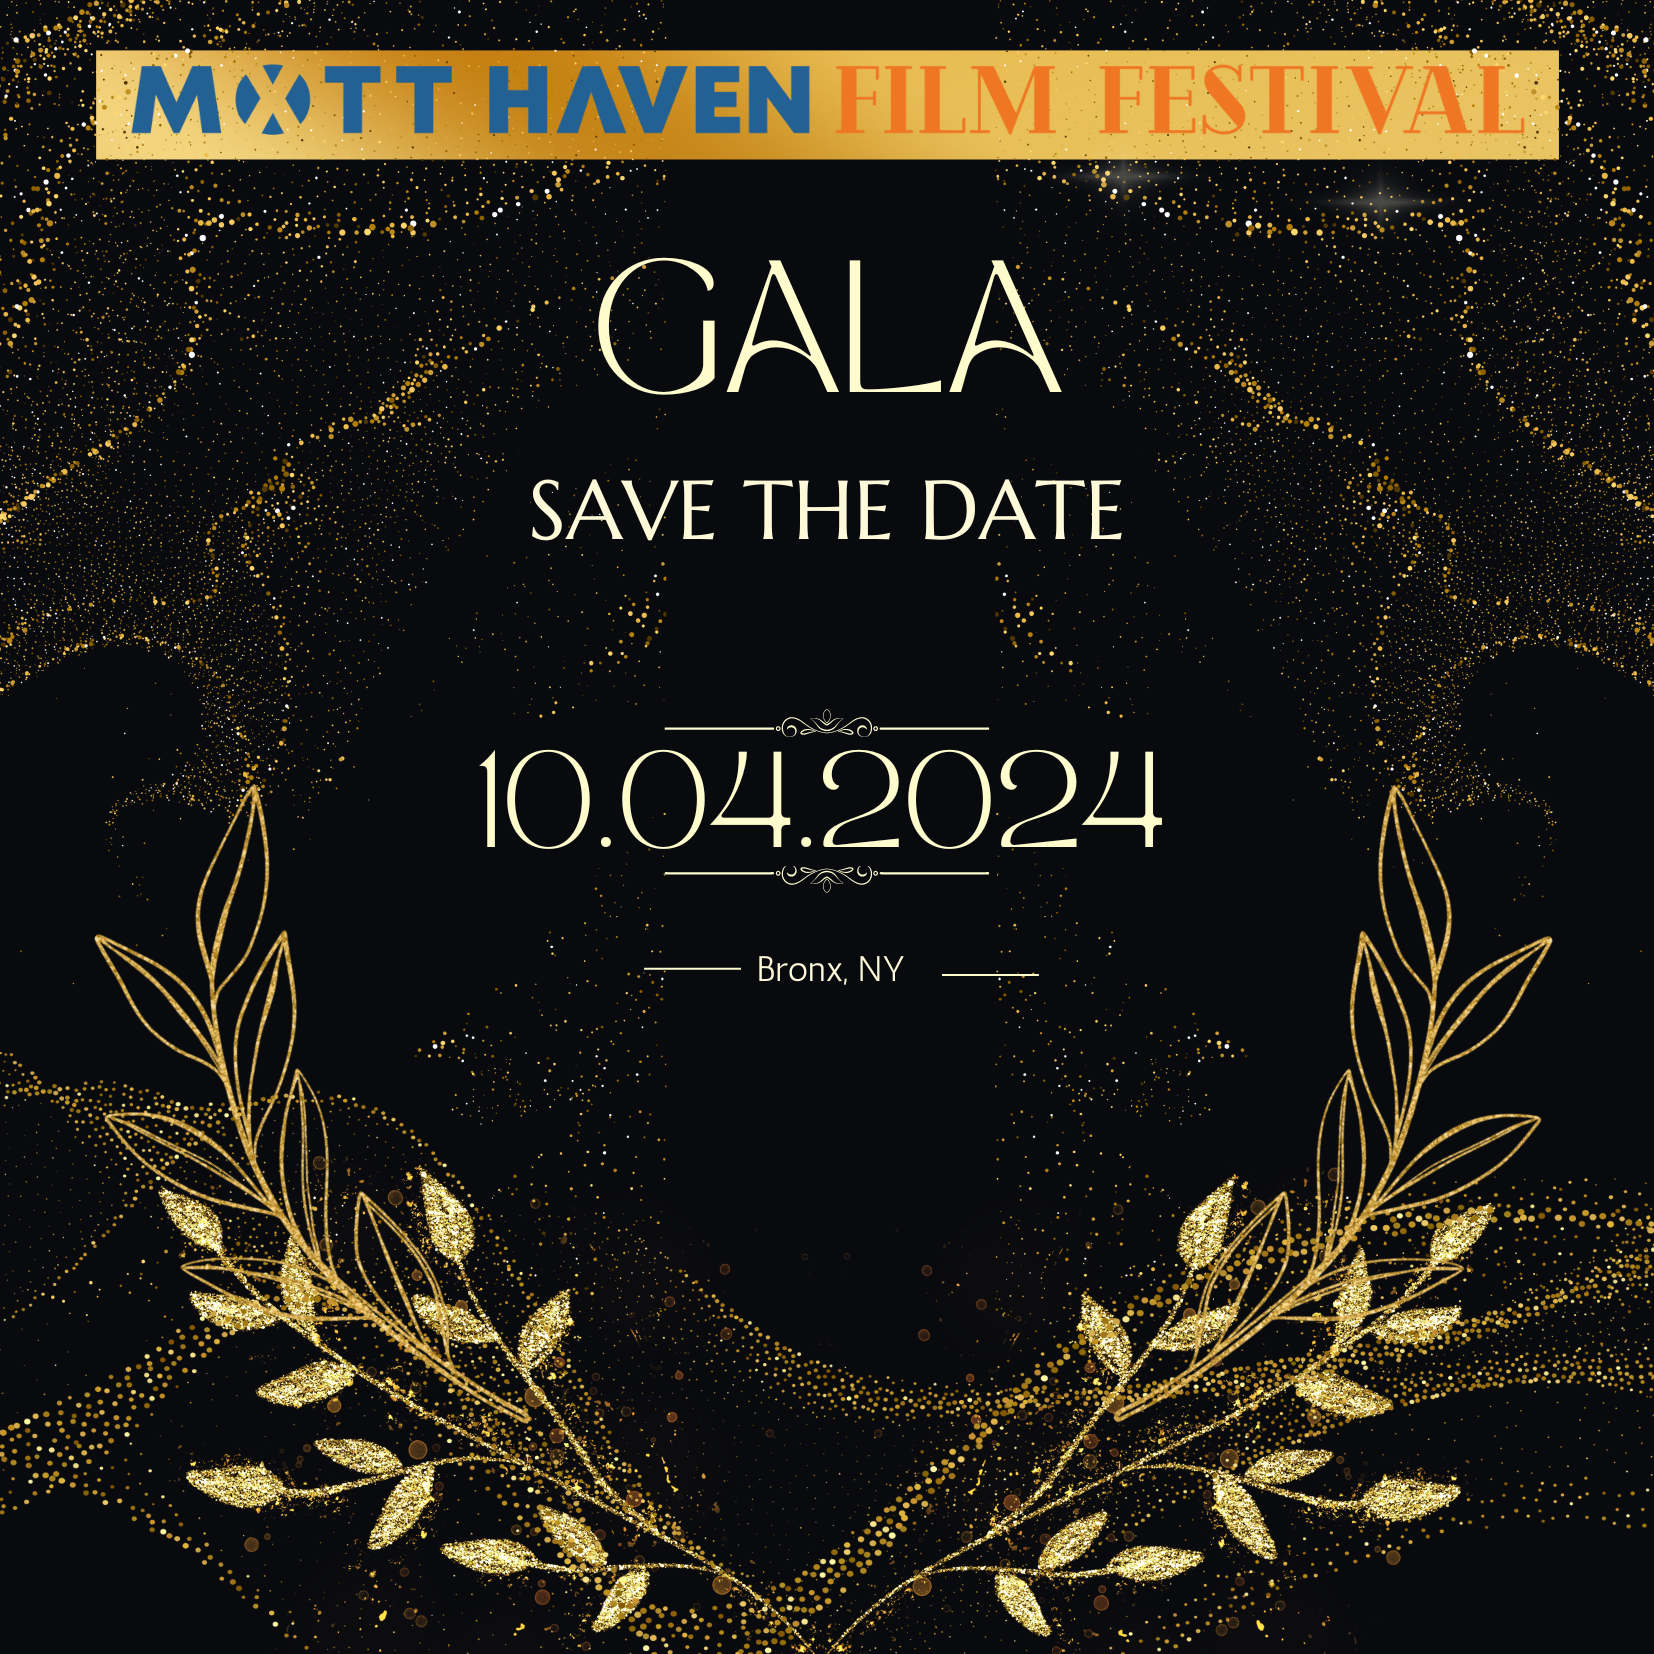 A gala save the date for the mott haven film festival